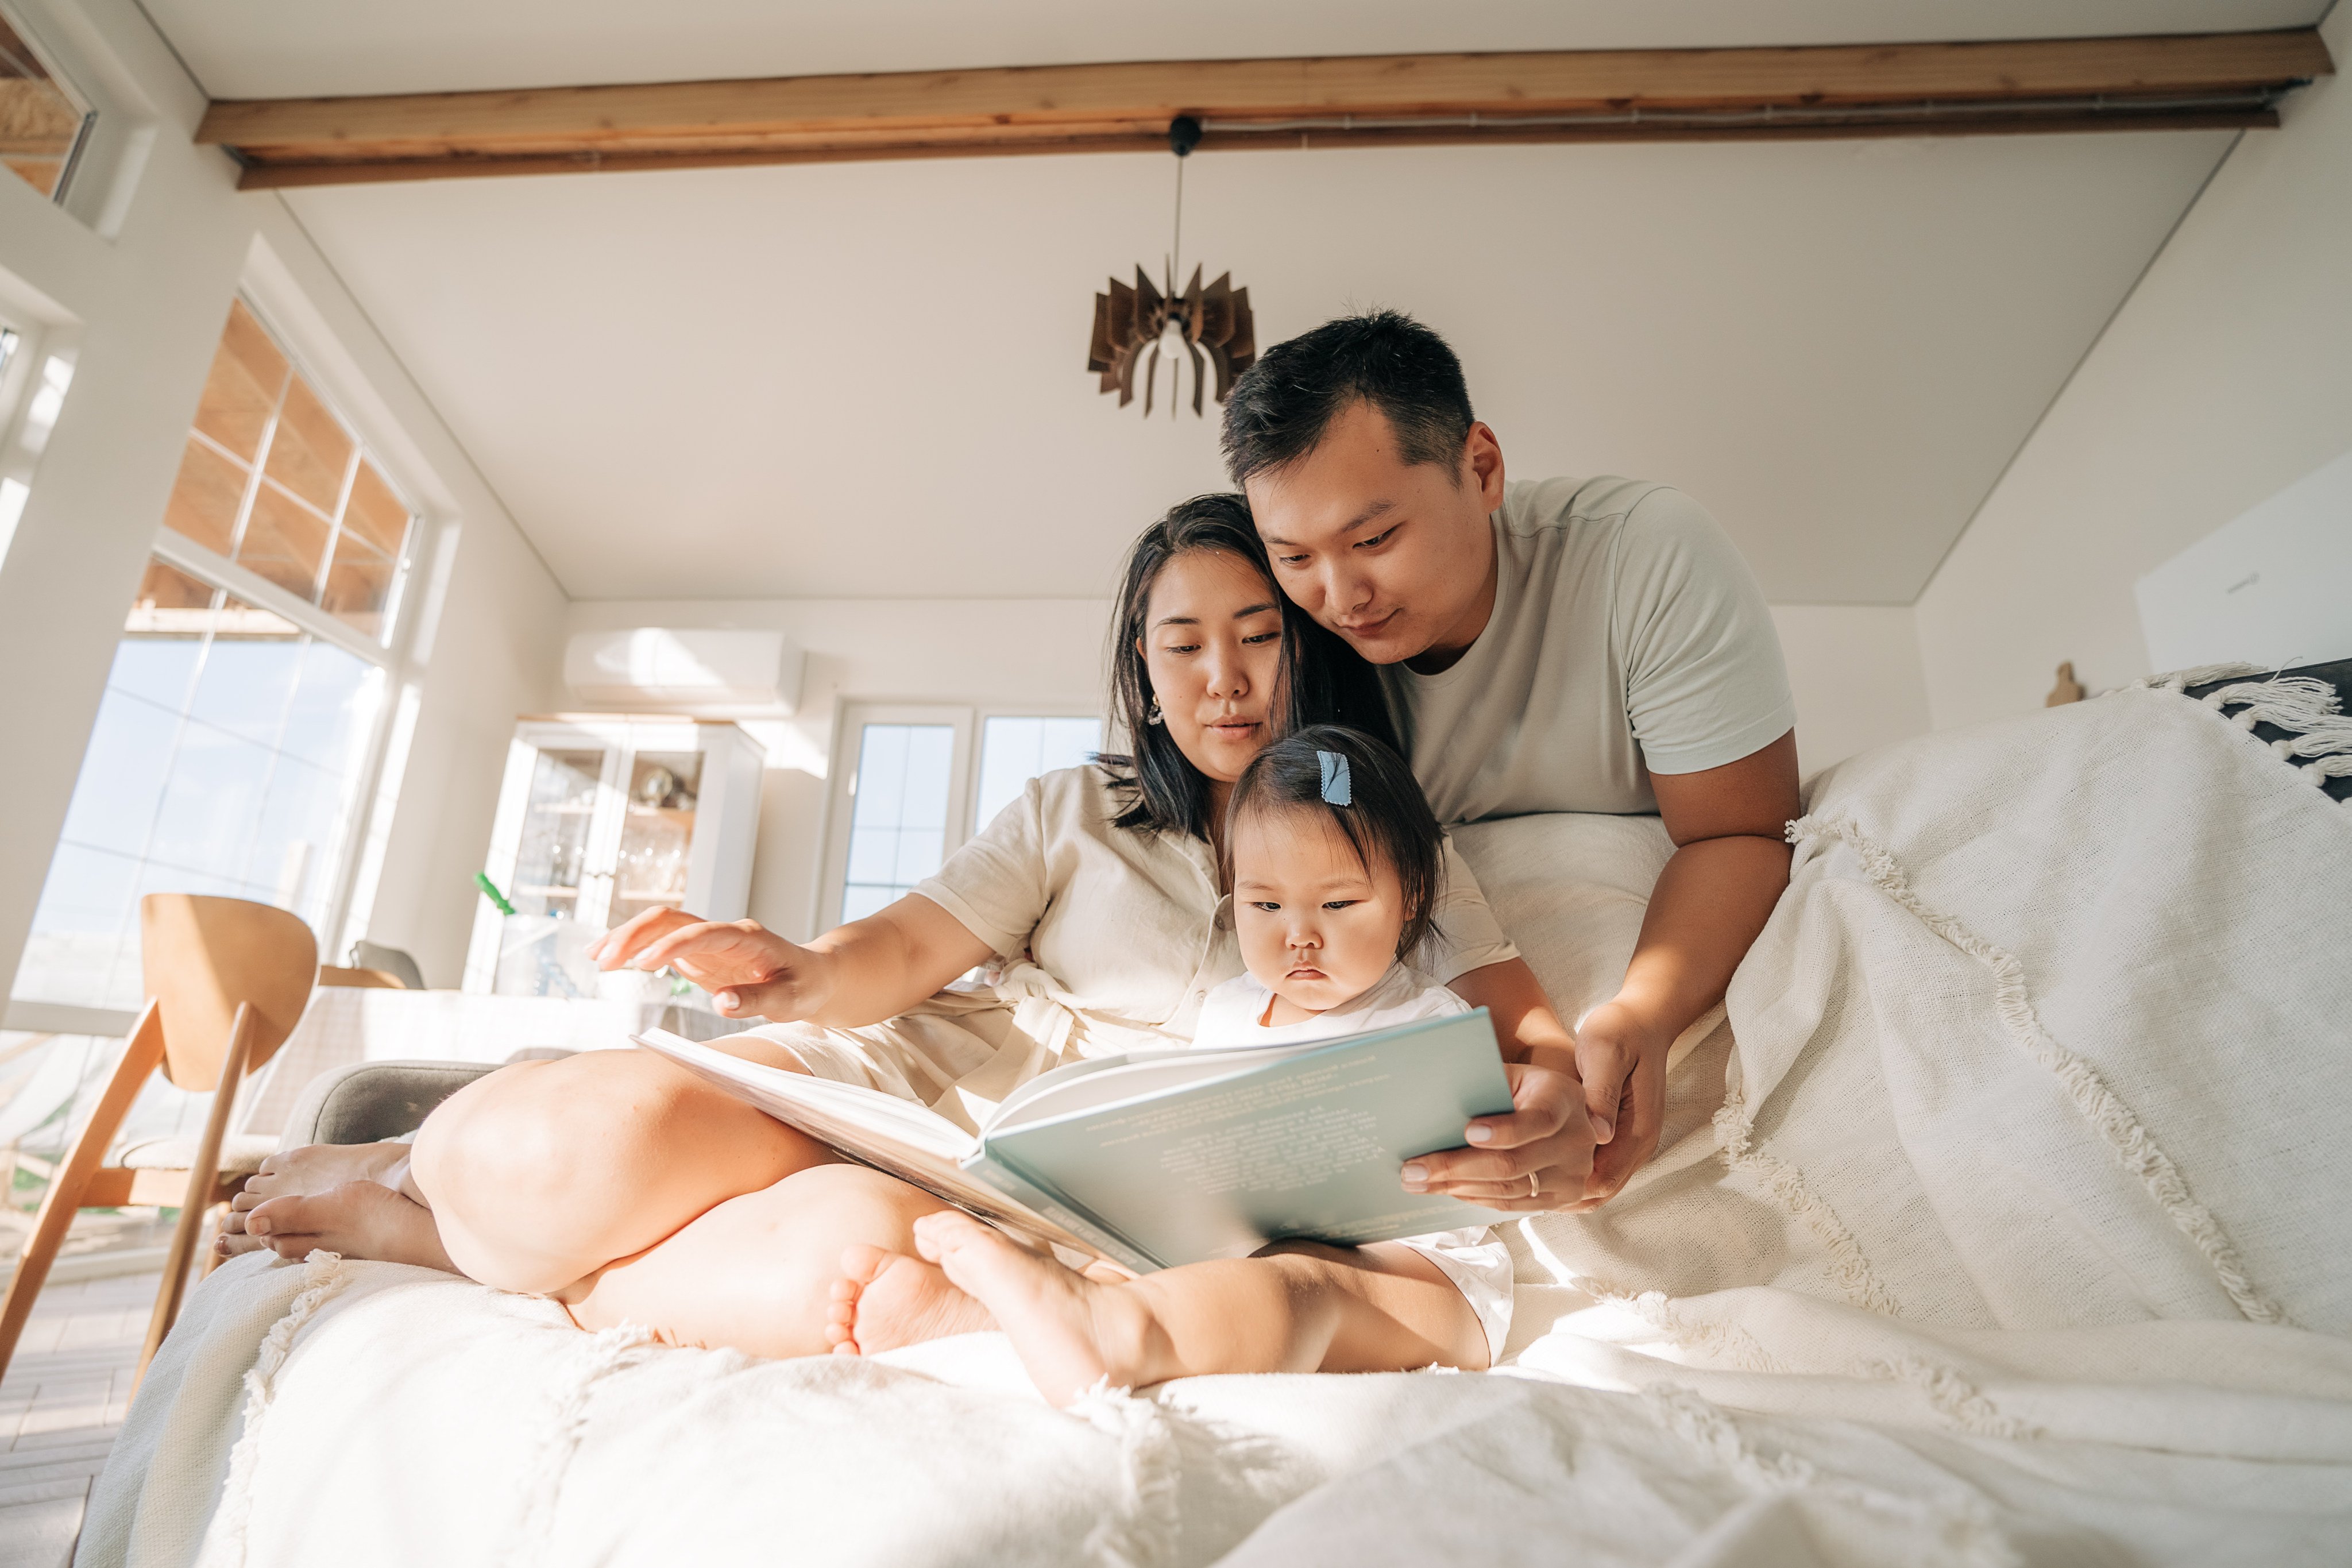 Reading aloud is beneficial for adults, not just children, research shows, in the way it helps reduce stress, improve memory and build intimacy. Photo: Getty Images